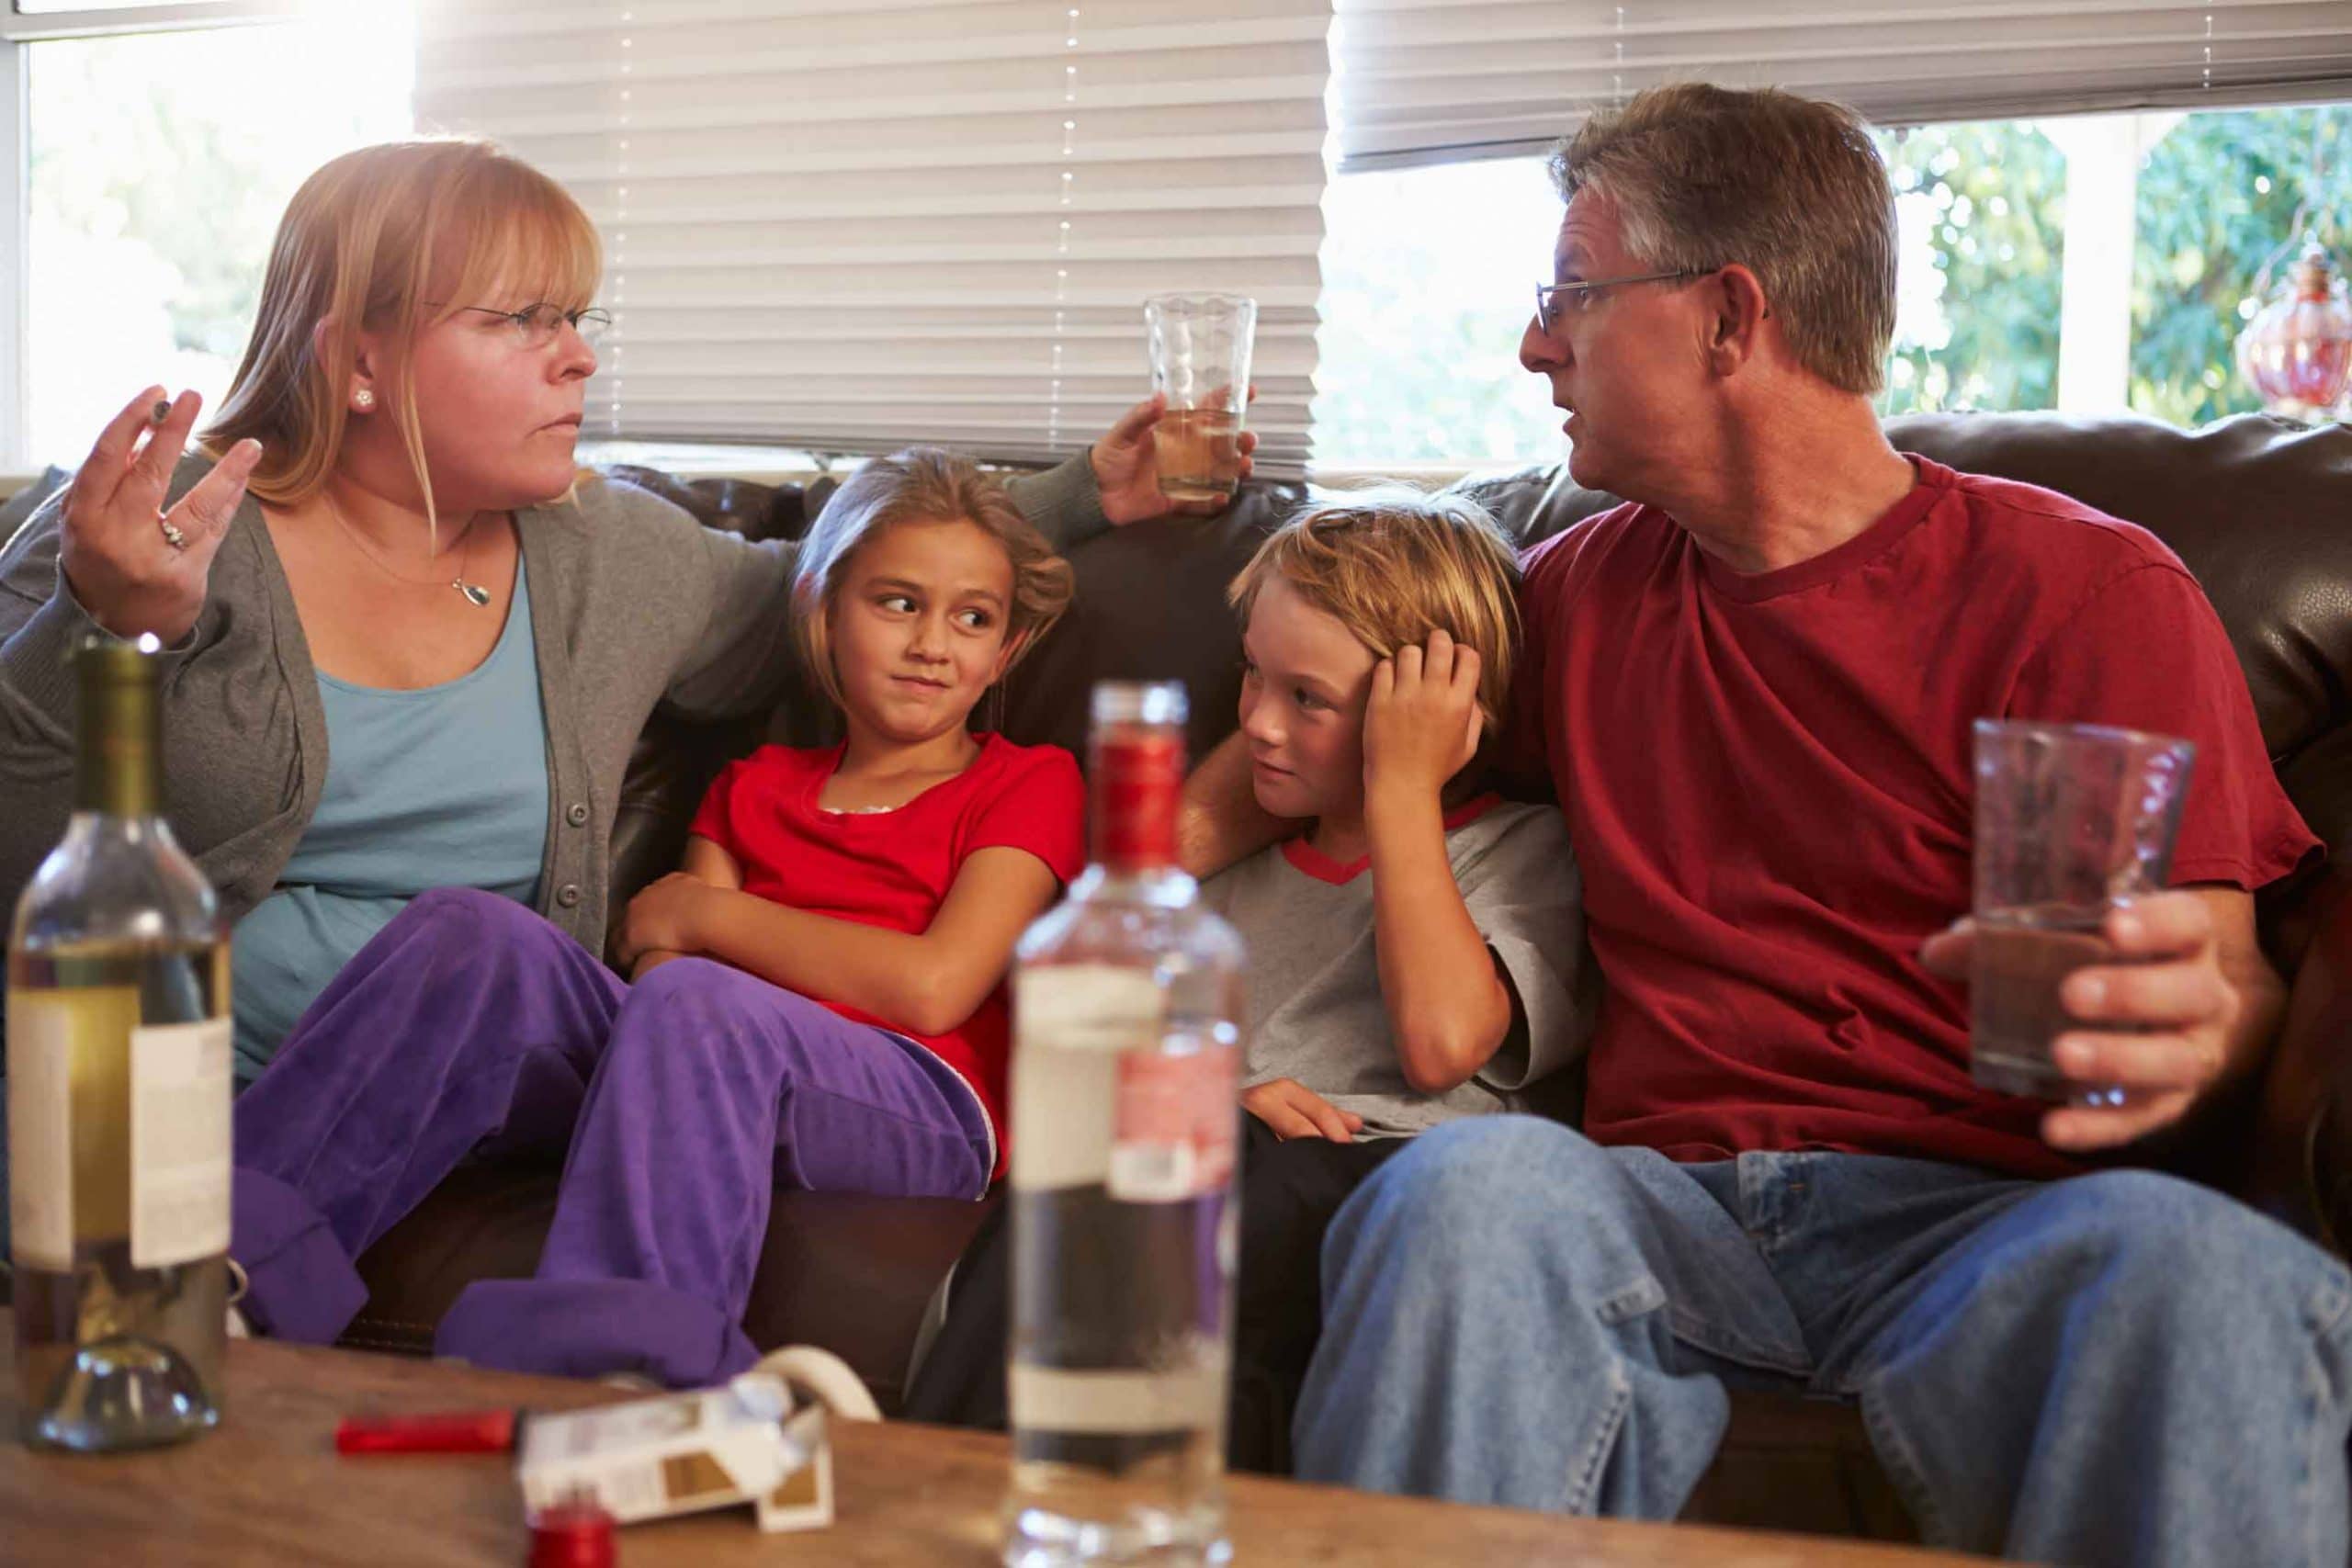 How Does Alcohol Abuse Affect The Home Life